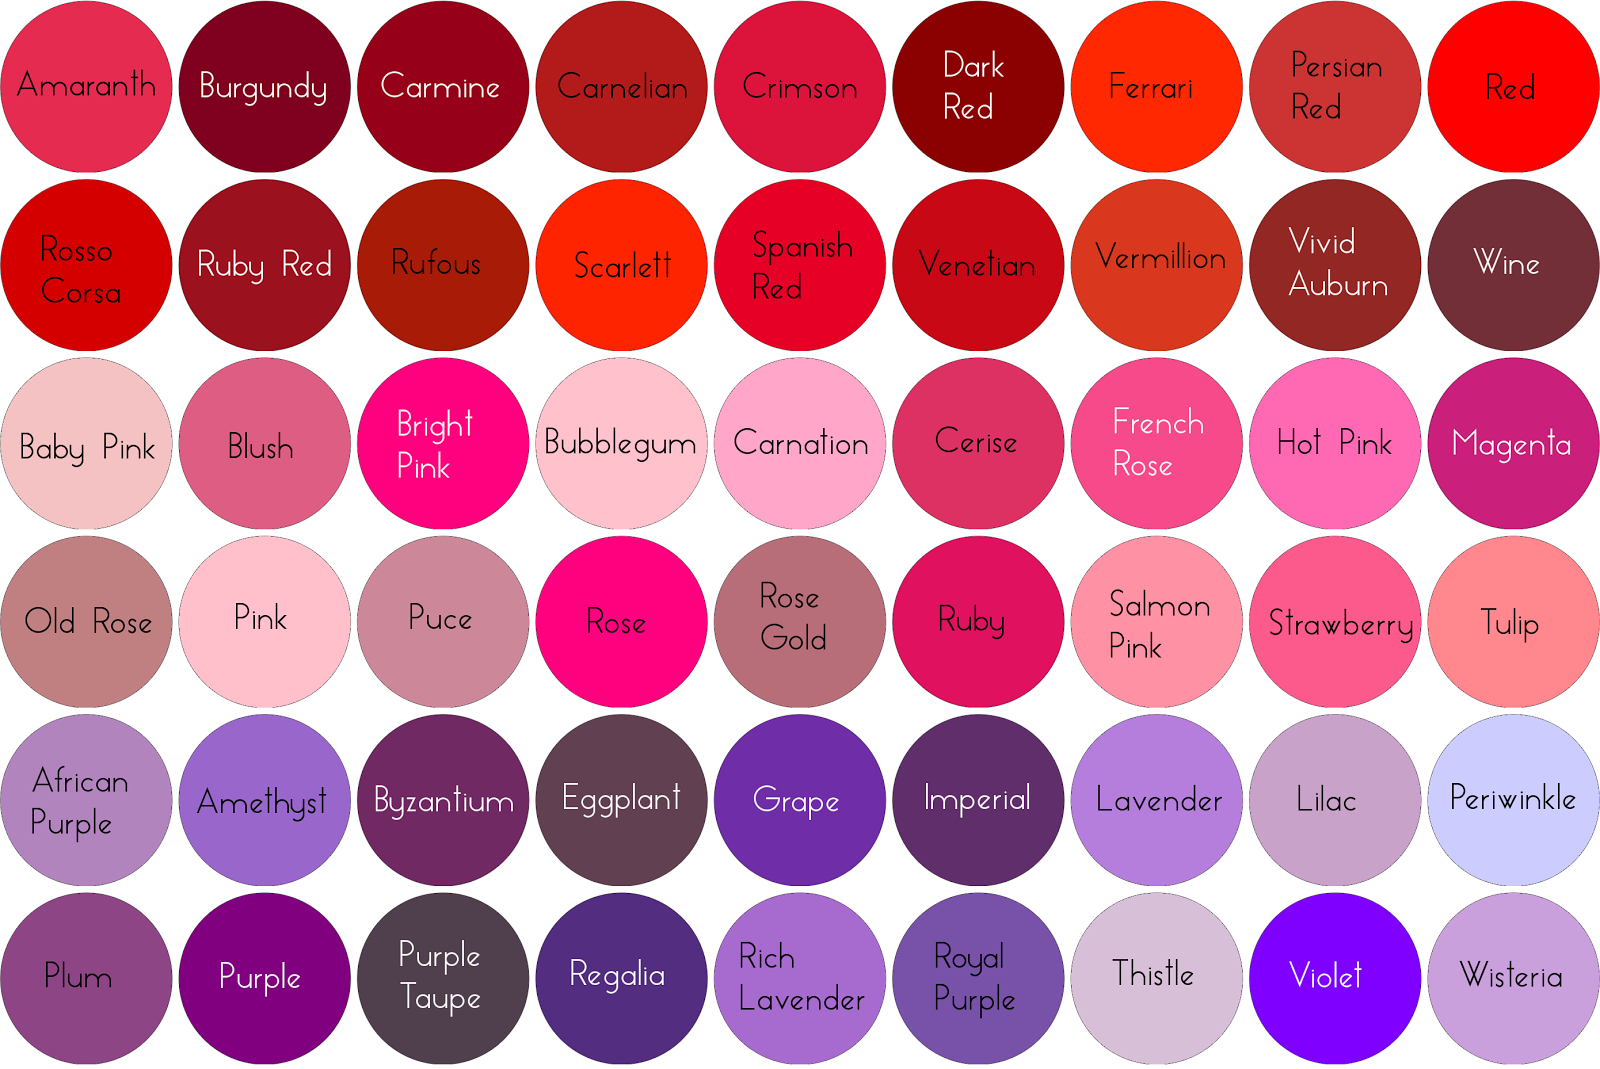 Different Shades Of Red Hair Color Names - Red Hair and Brunette Ideas 2016